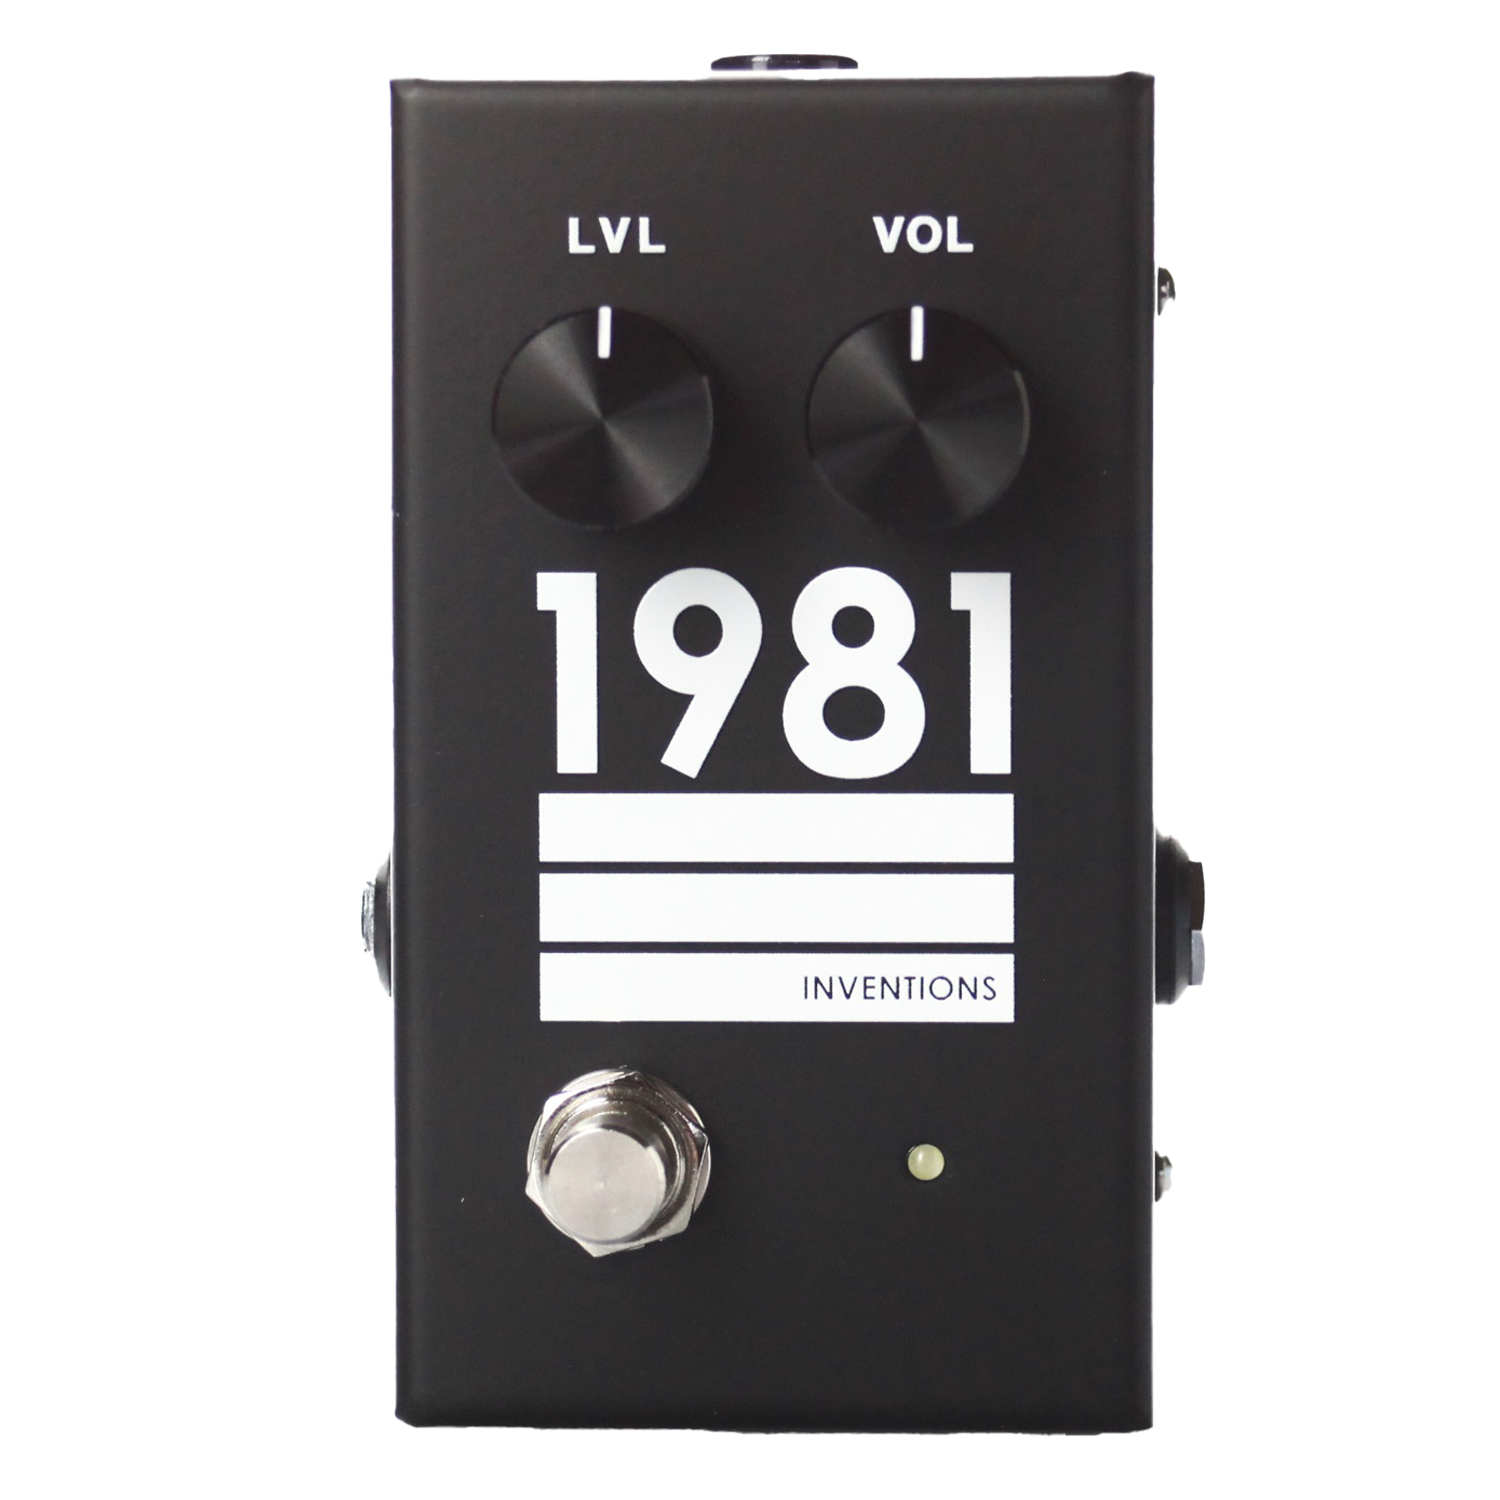 1981 Inventions / LVL  =Booster / Overdrive=